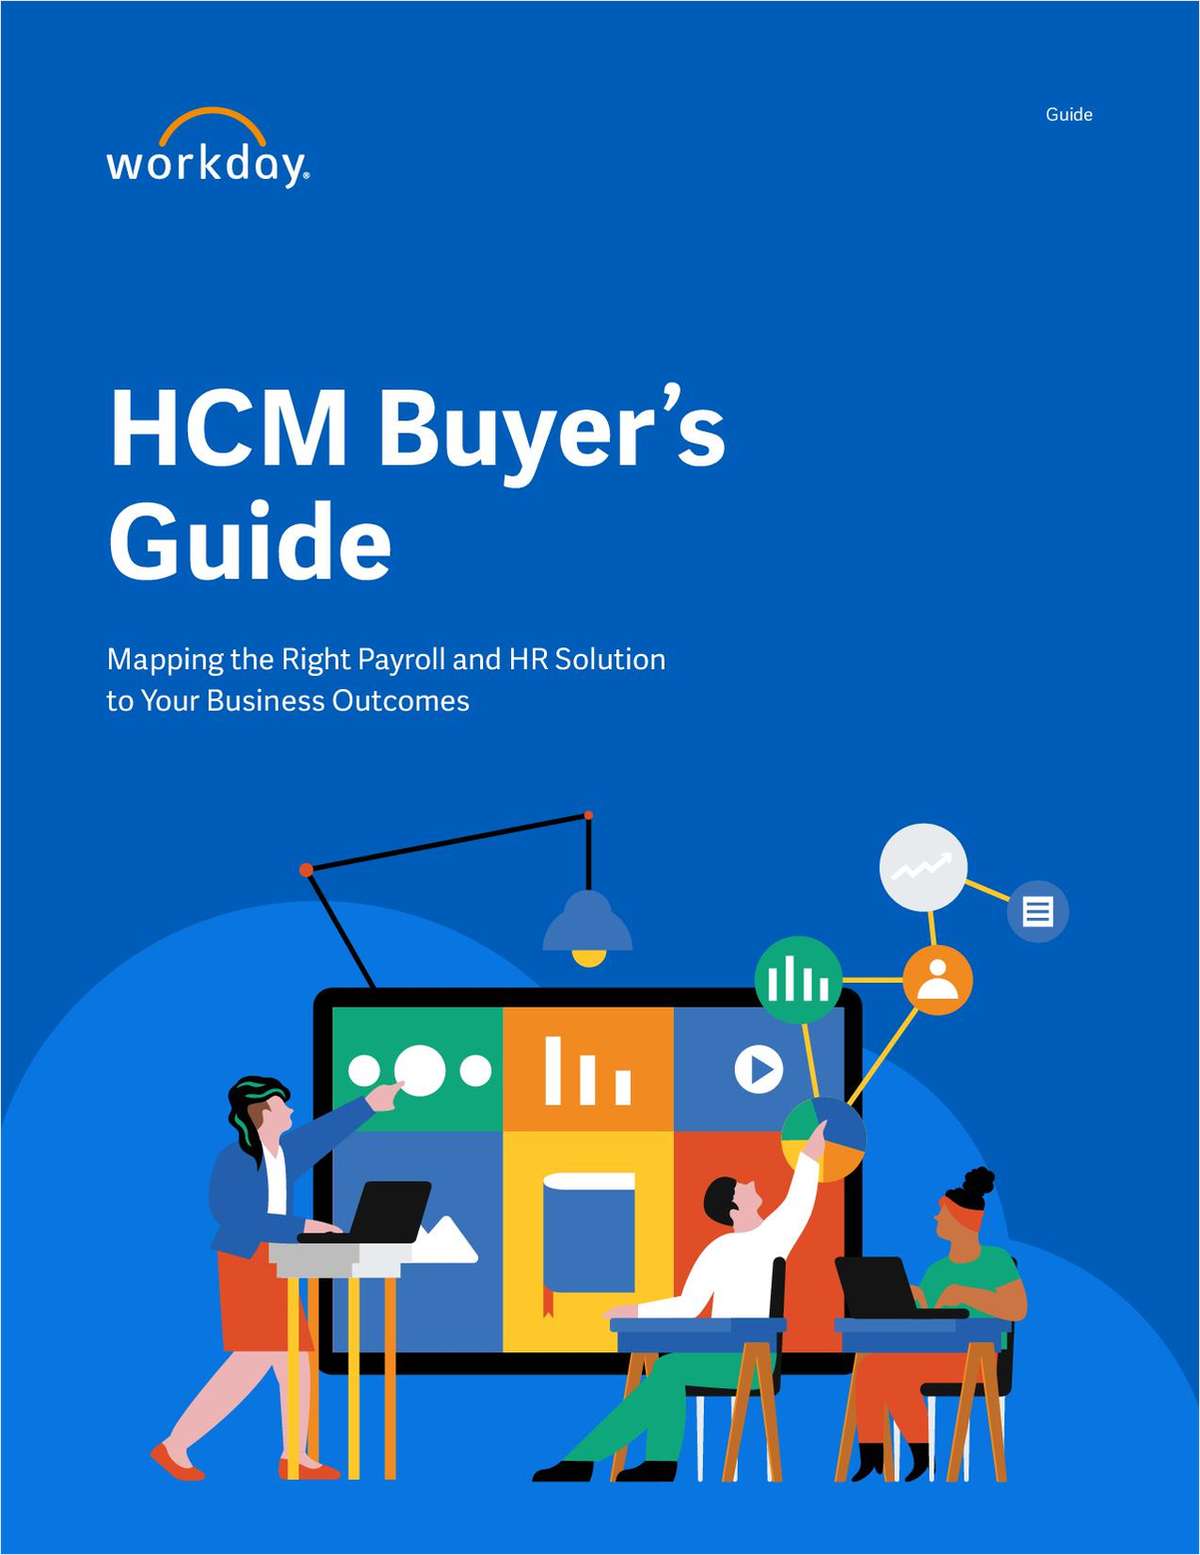 HCM Buyer's Guide - Mapping the Right Payroll and HR Solution to Your Business Outcomes